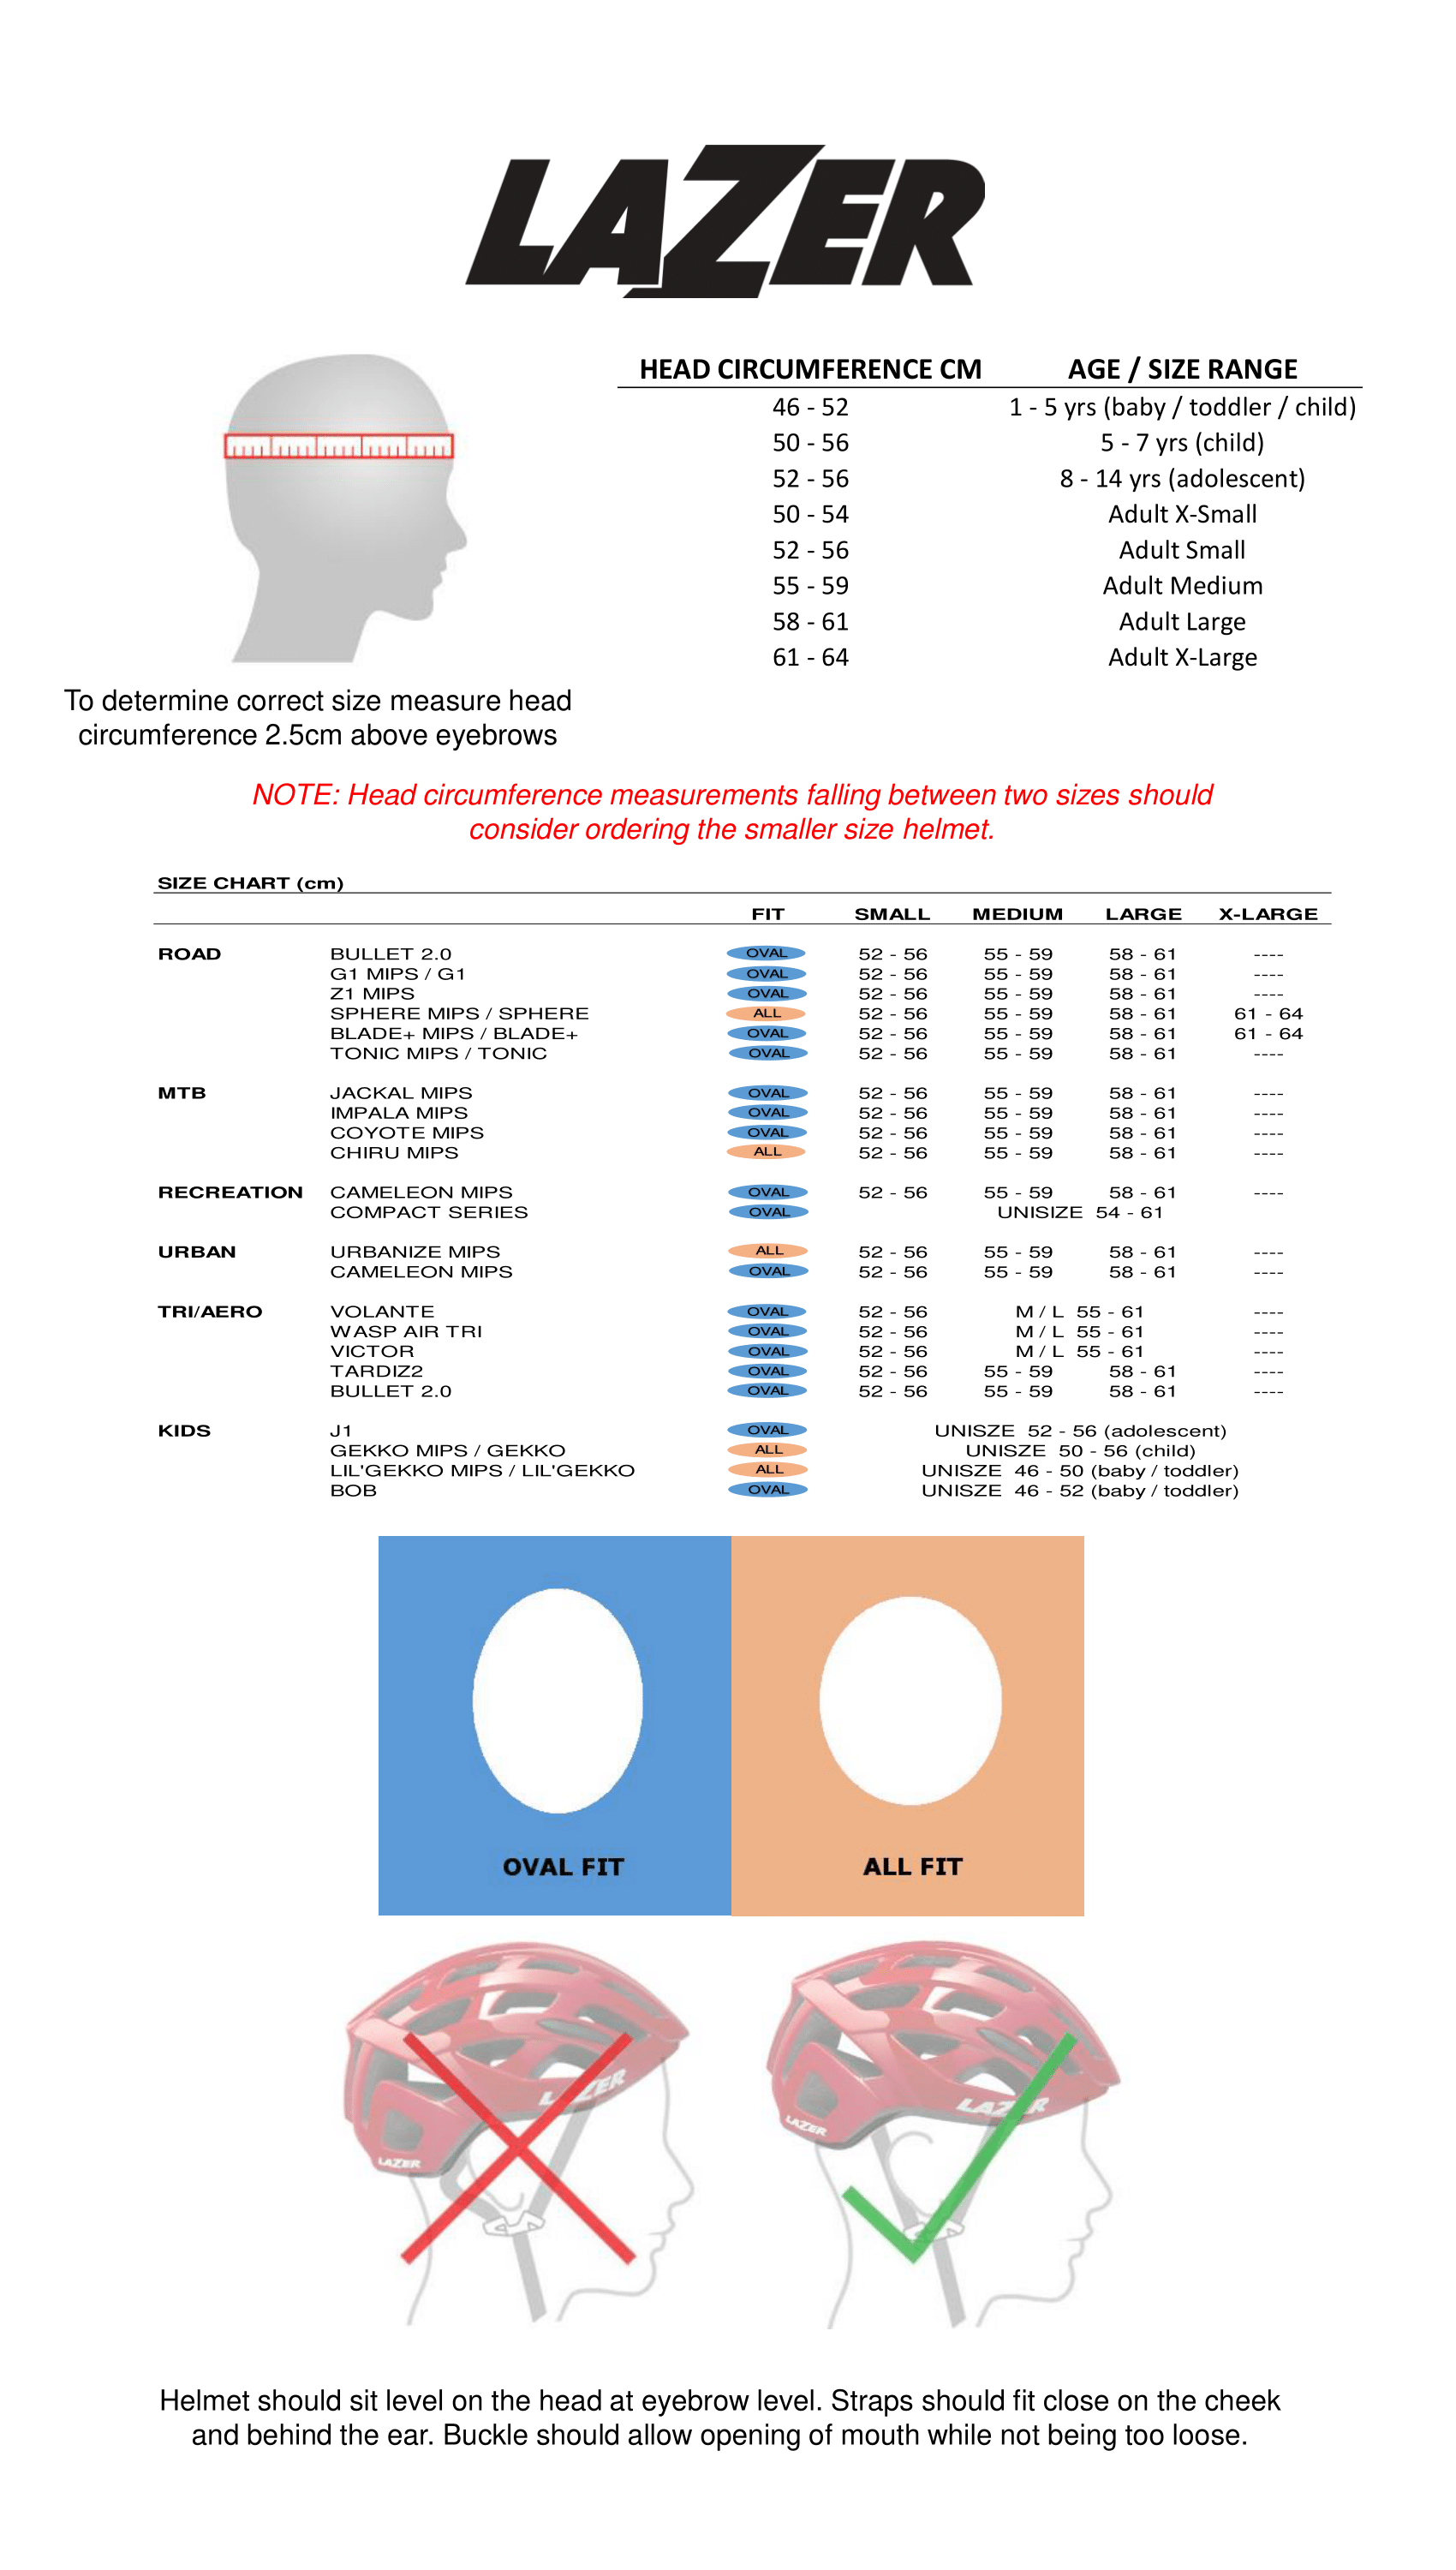 Lazer Helmet Size and Fit Guide Chart